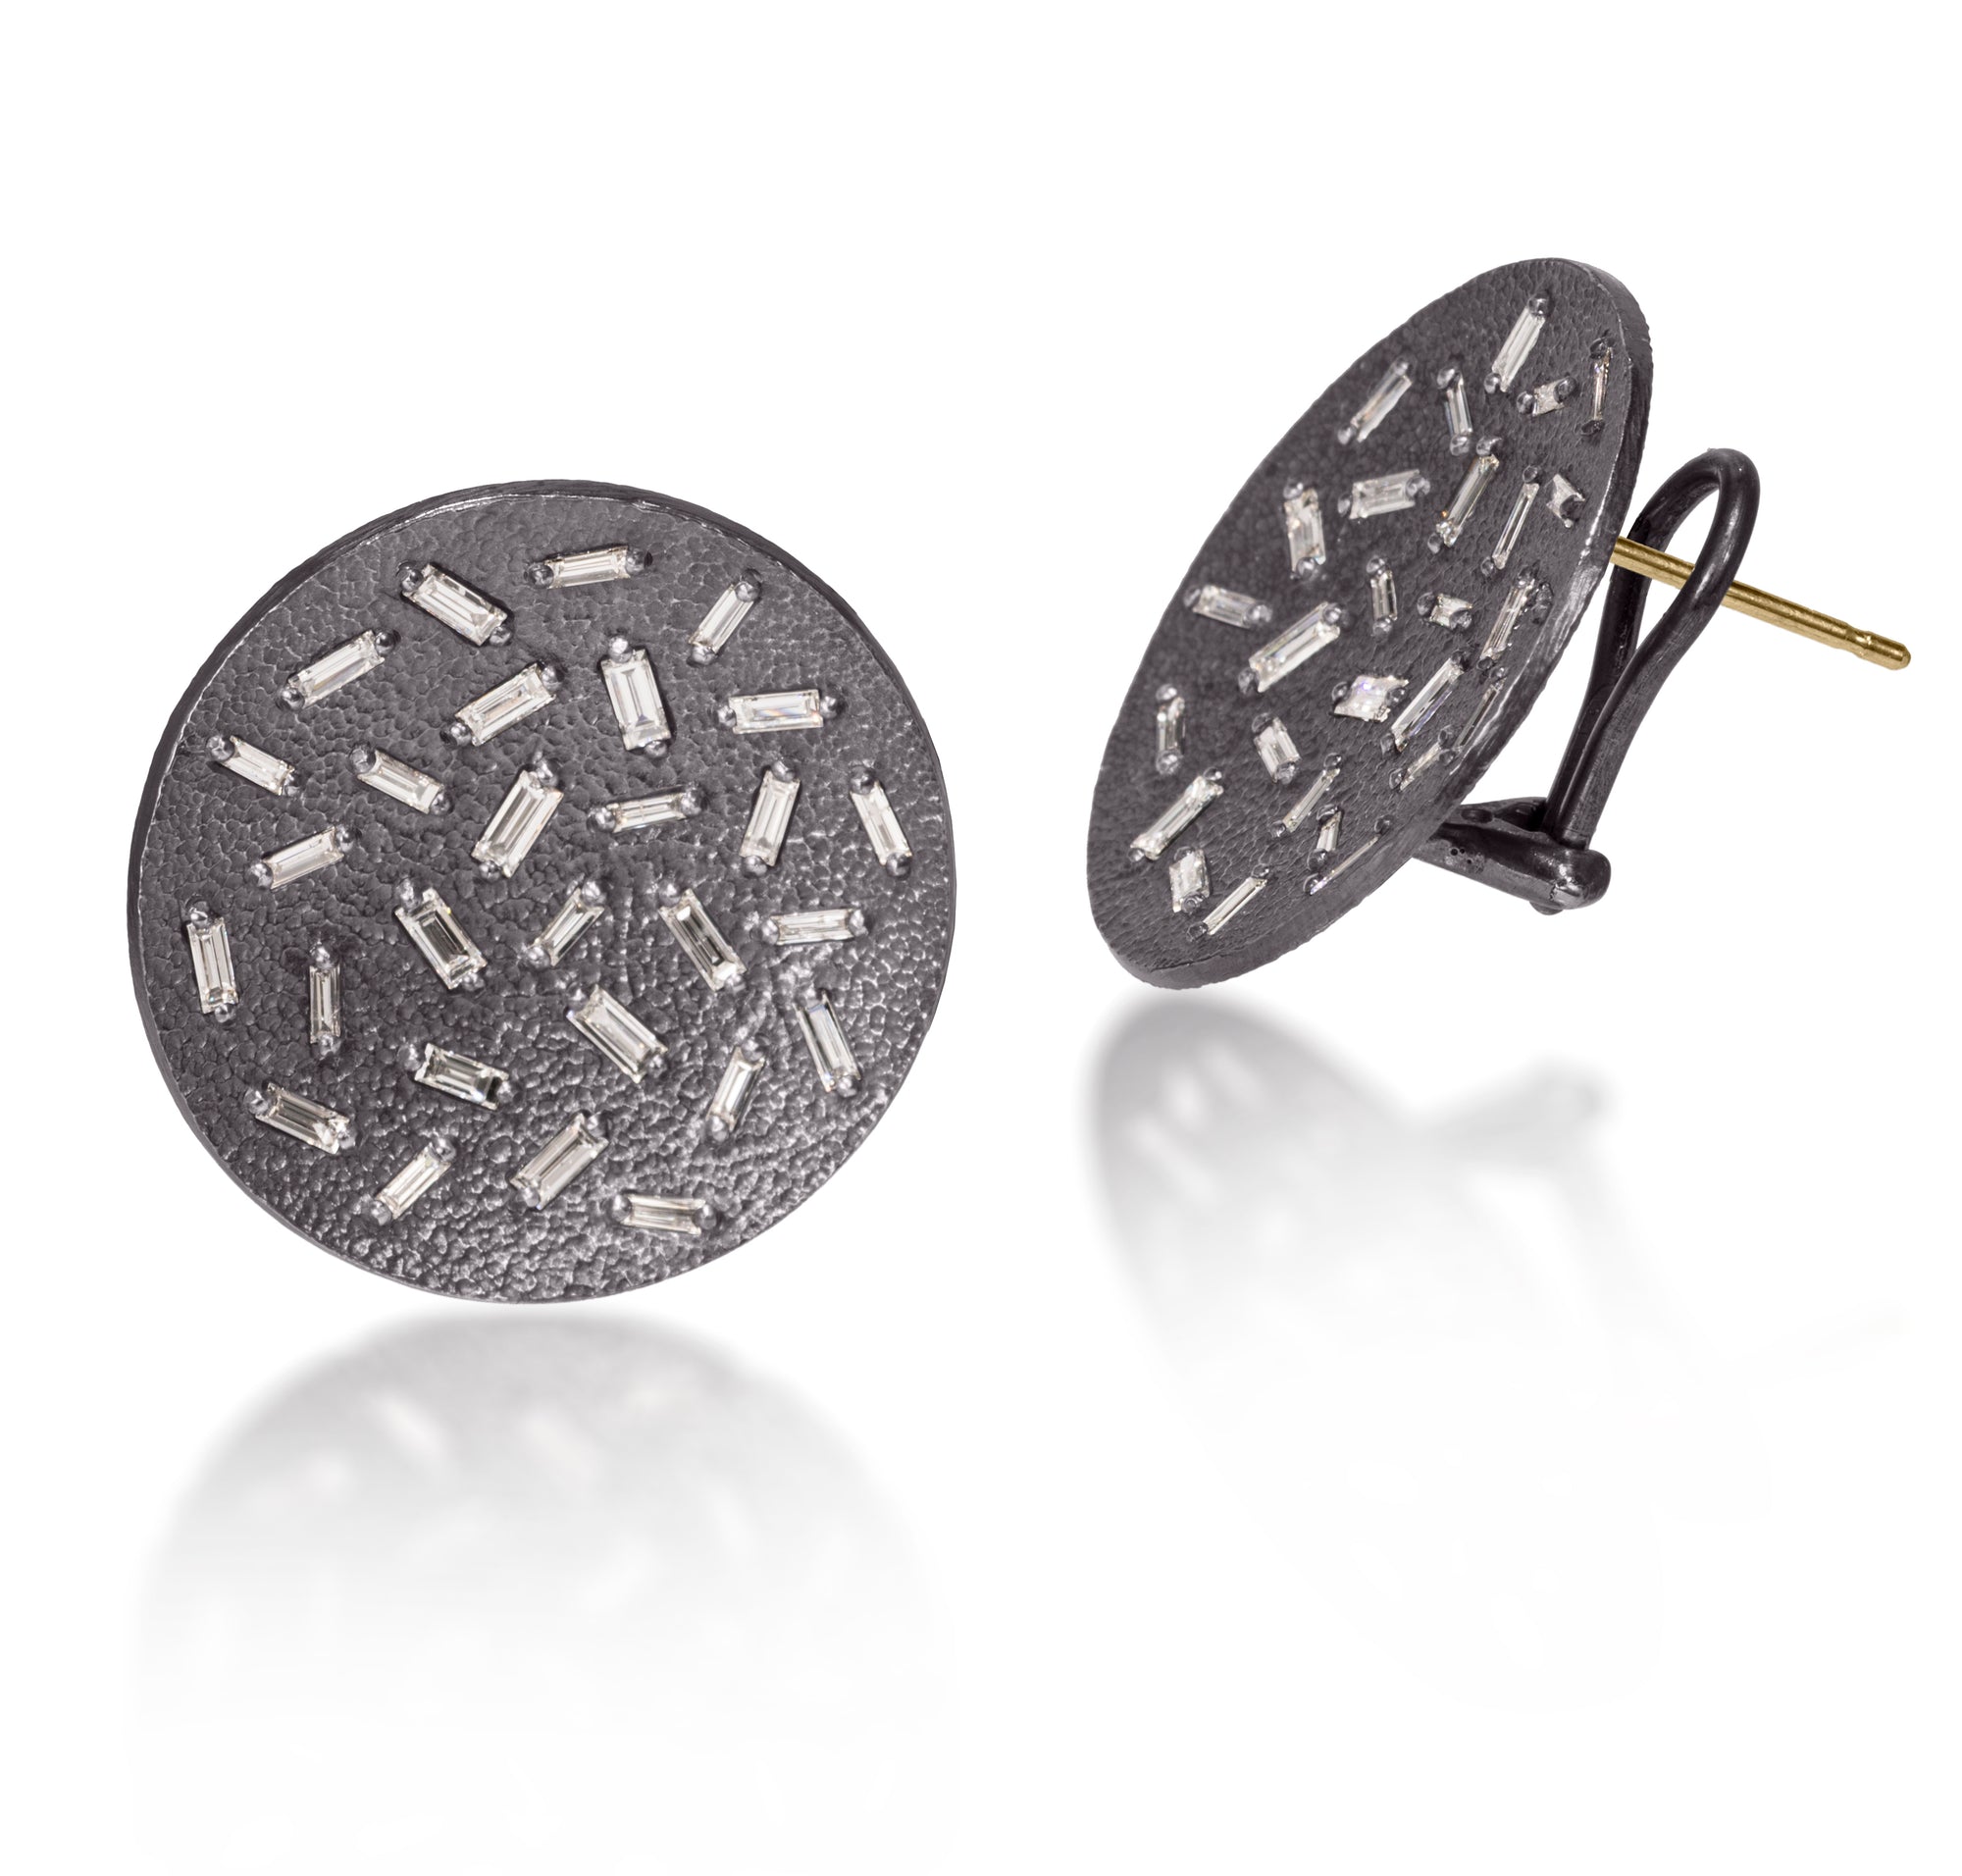 This simple but dramatic post earring is perfect for everyday or a fabulous night out.  Offered in three richly textured color ways, oxidized sterling, 18k gold, palladium.  Each earring set with 28 white diamond baguettes.  18k post features an omega back for added support. 1.546 tcw.